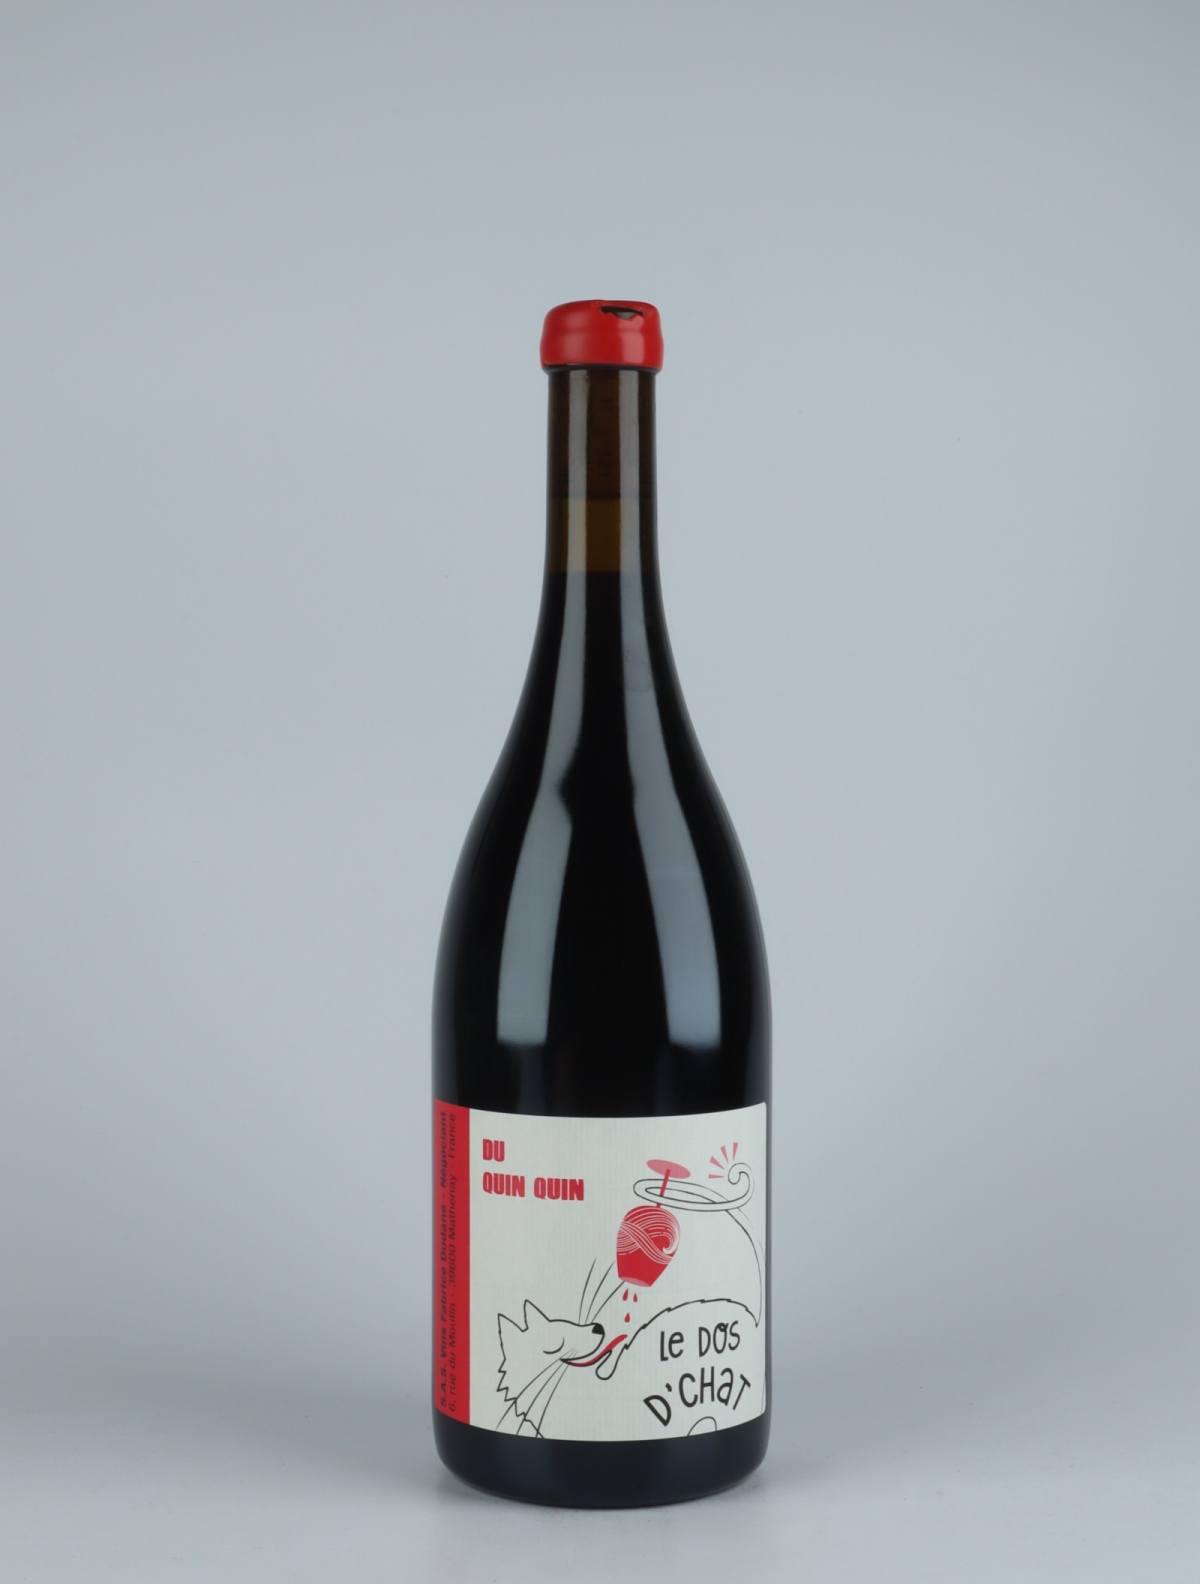 A bottle 2020 Du Quin Quin Red wine from Fabrice Dodane, Jura in France